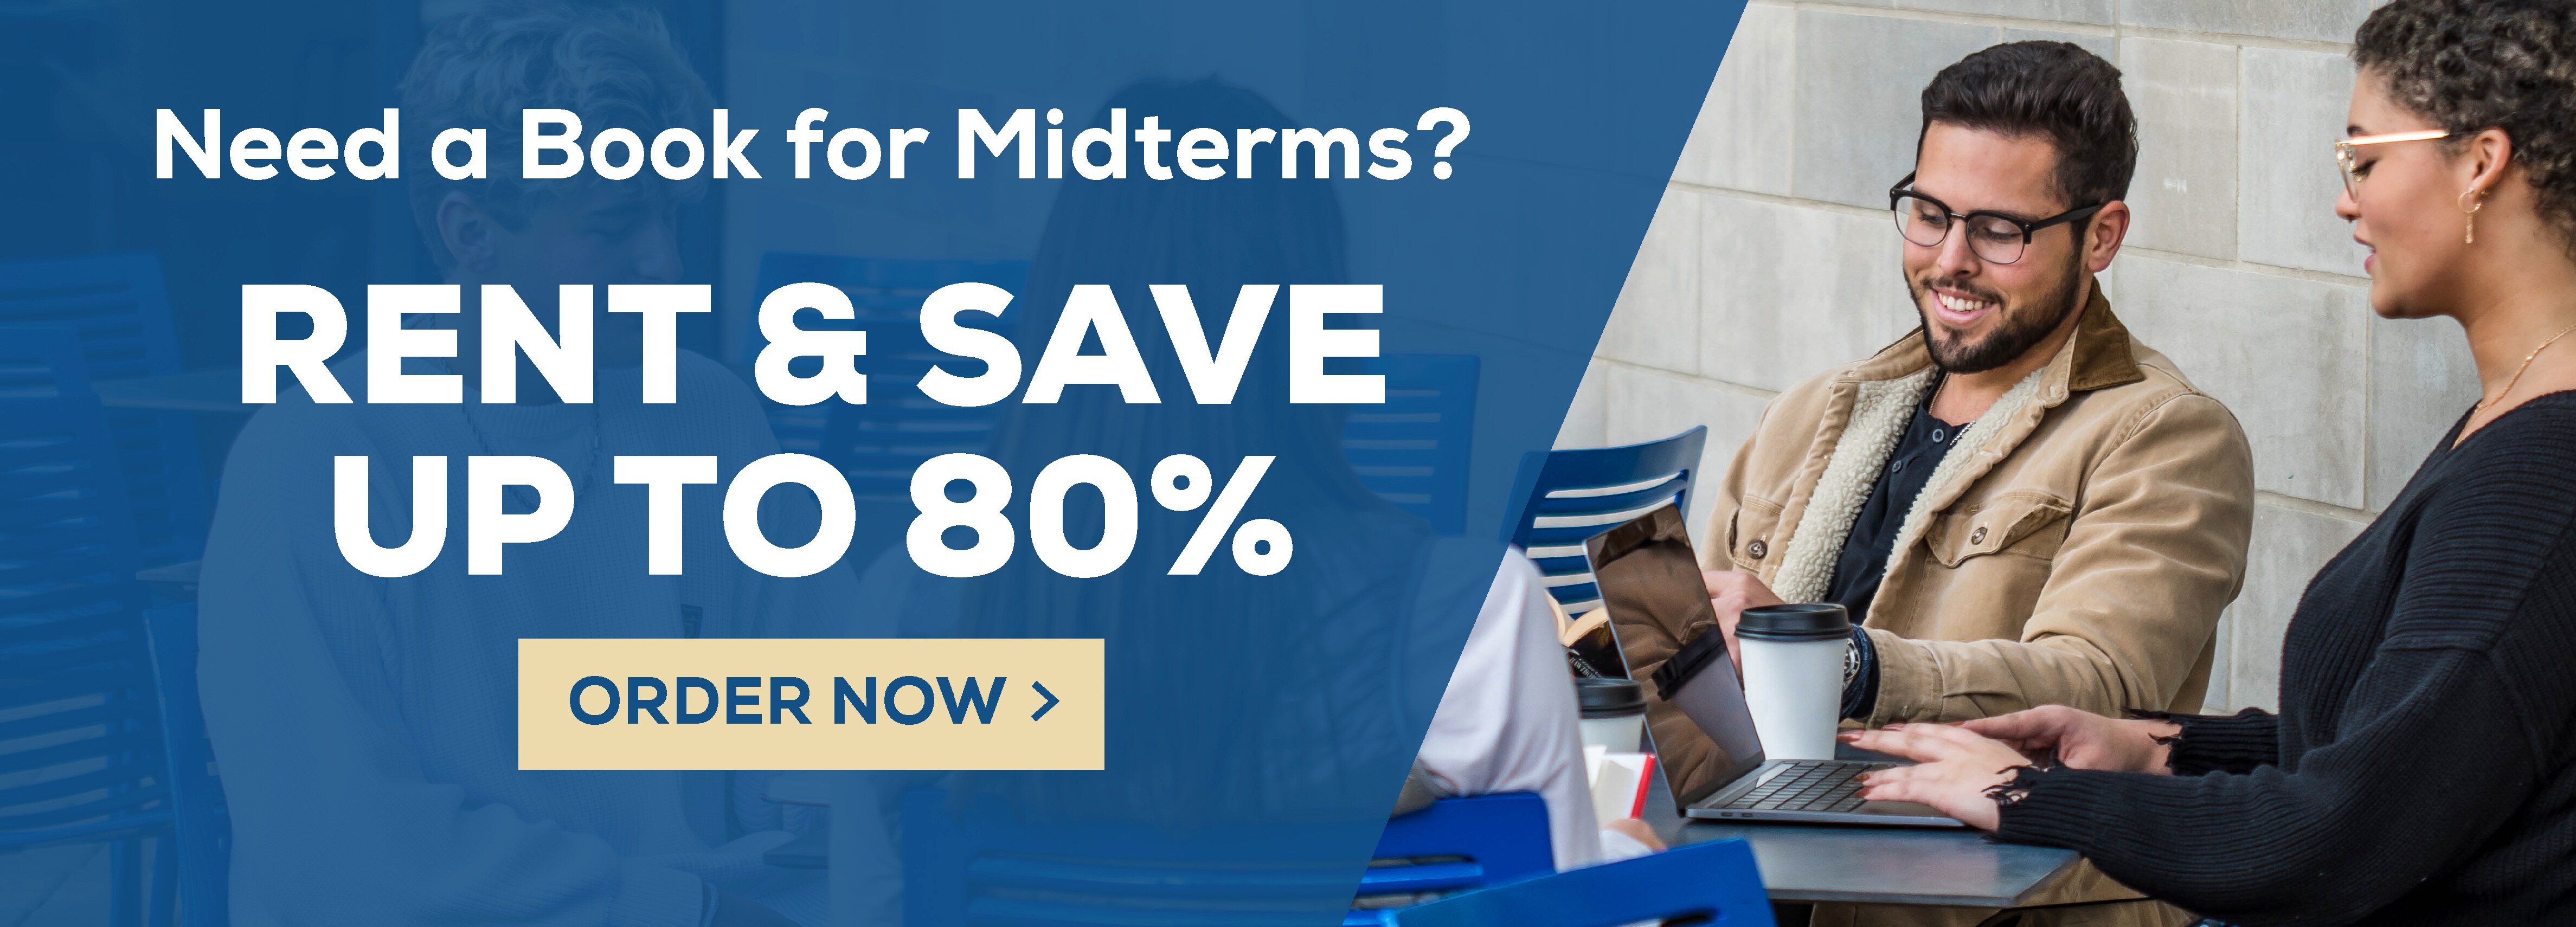 Need a Book for Midterms? Rent & Save 80% Order Now>